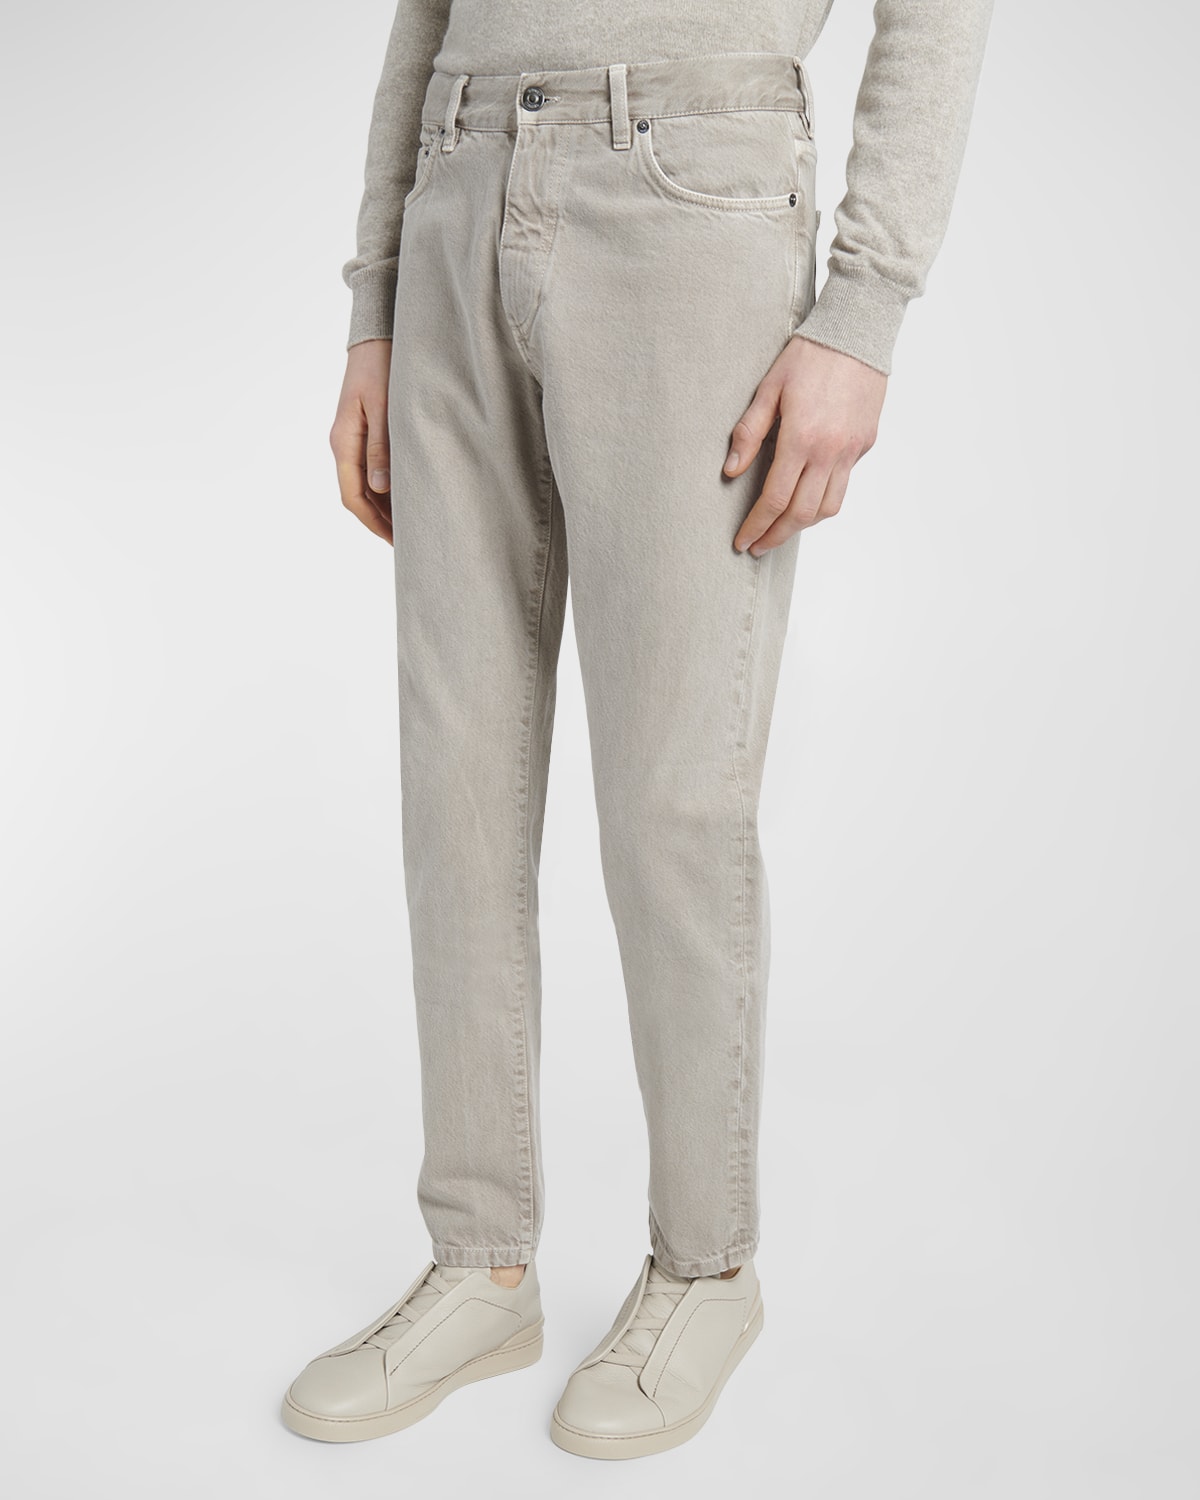 Zegna Men's Marble Effect Five-pocket Jeans In Taupe